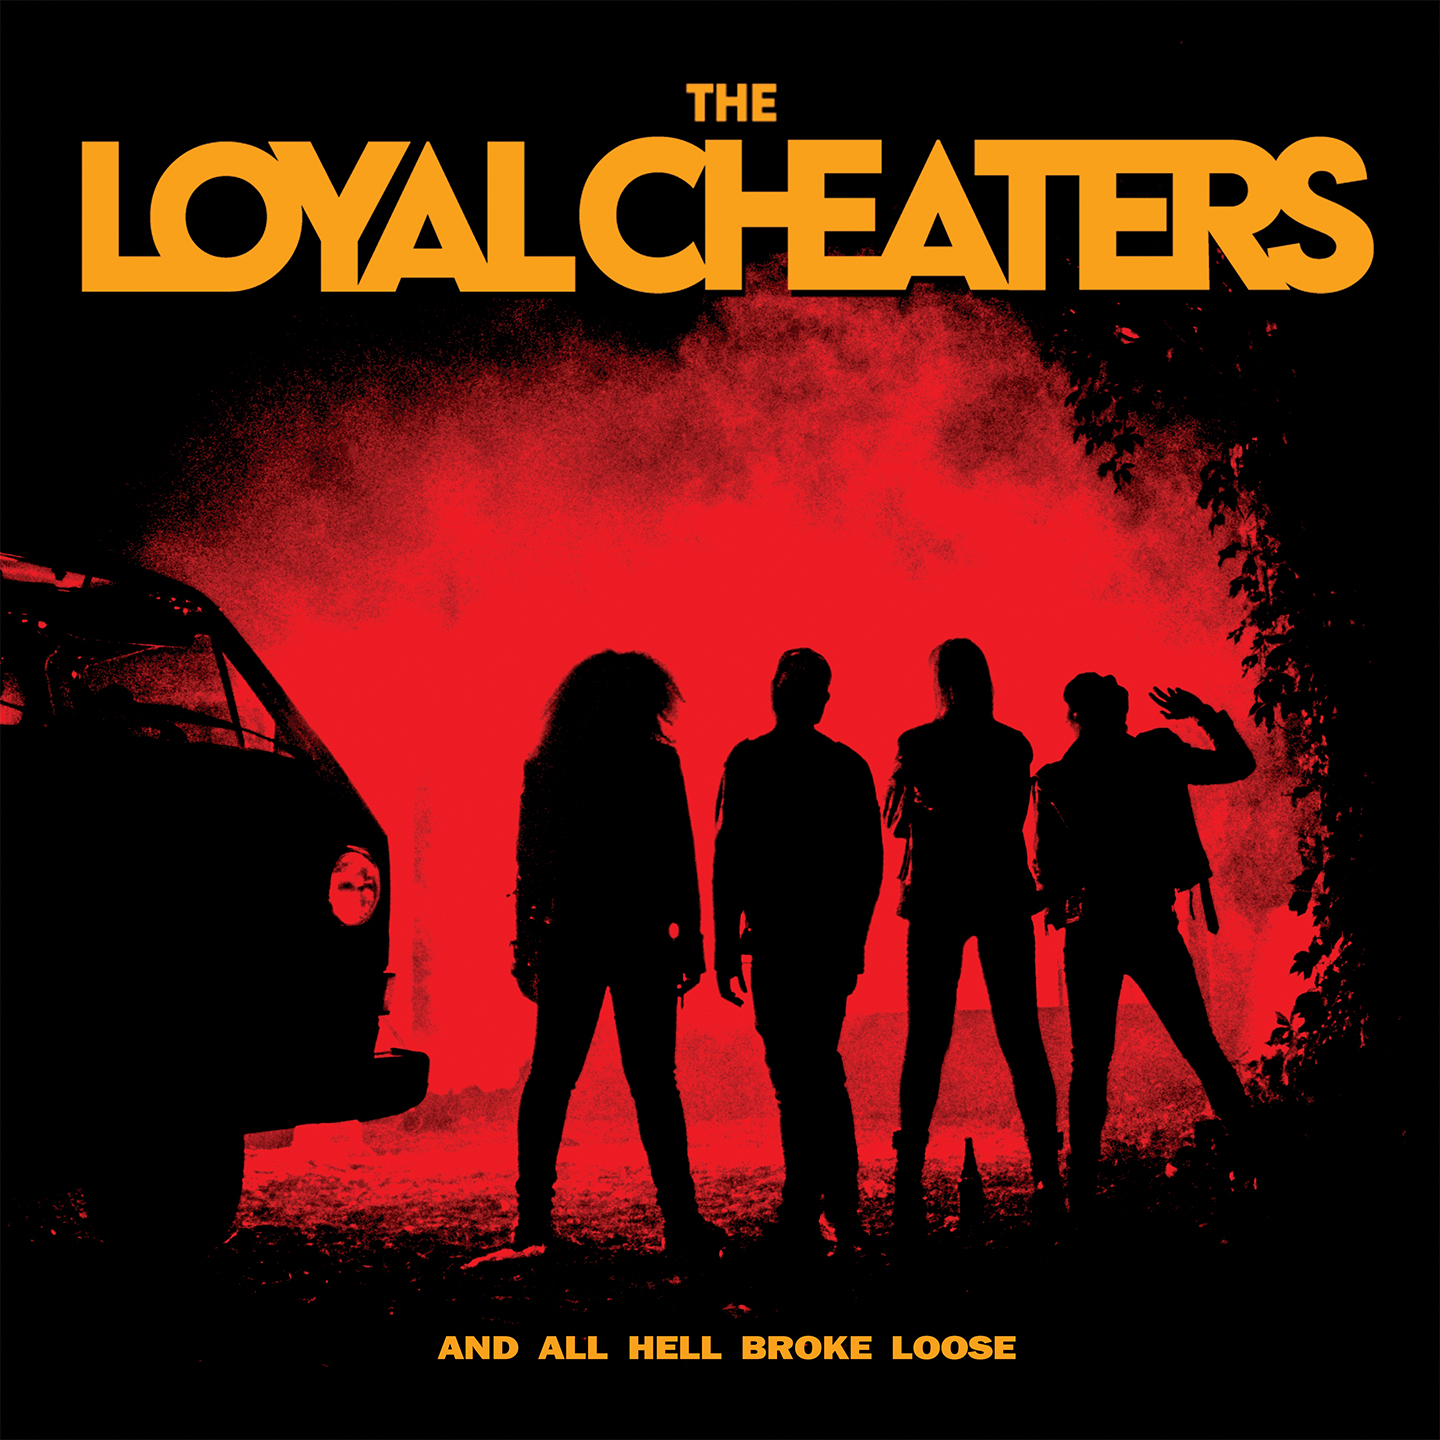 The Loyal Cheaters